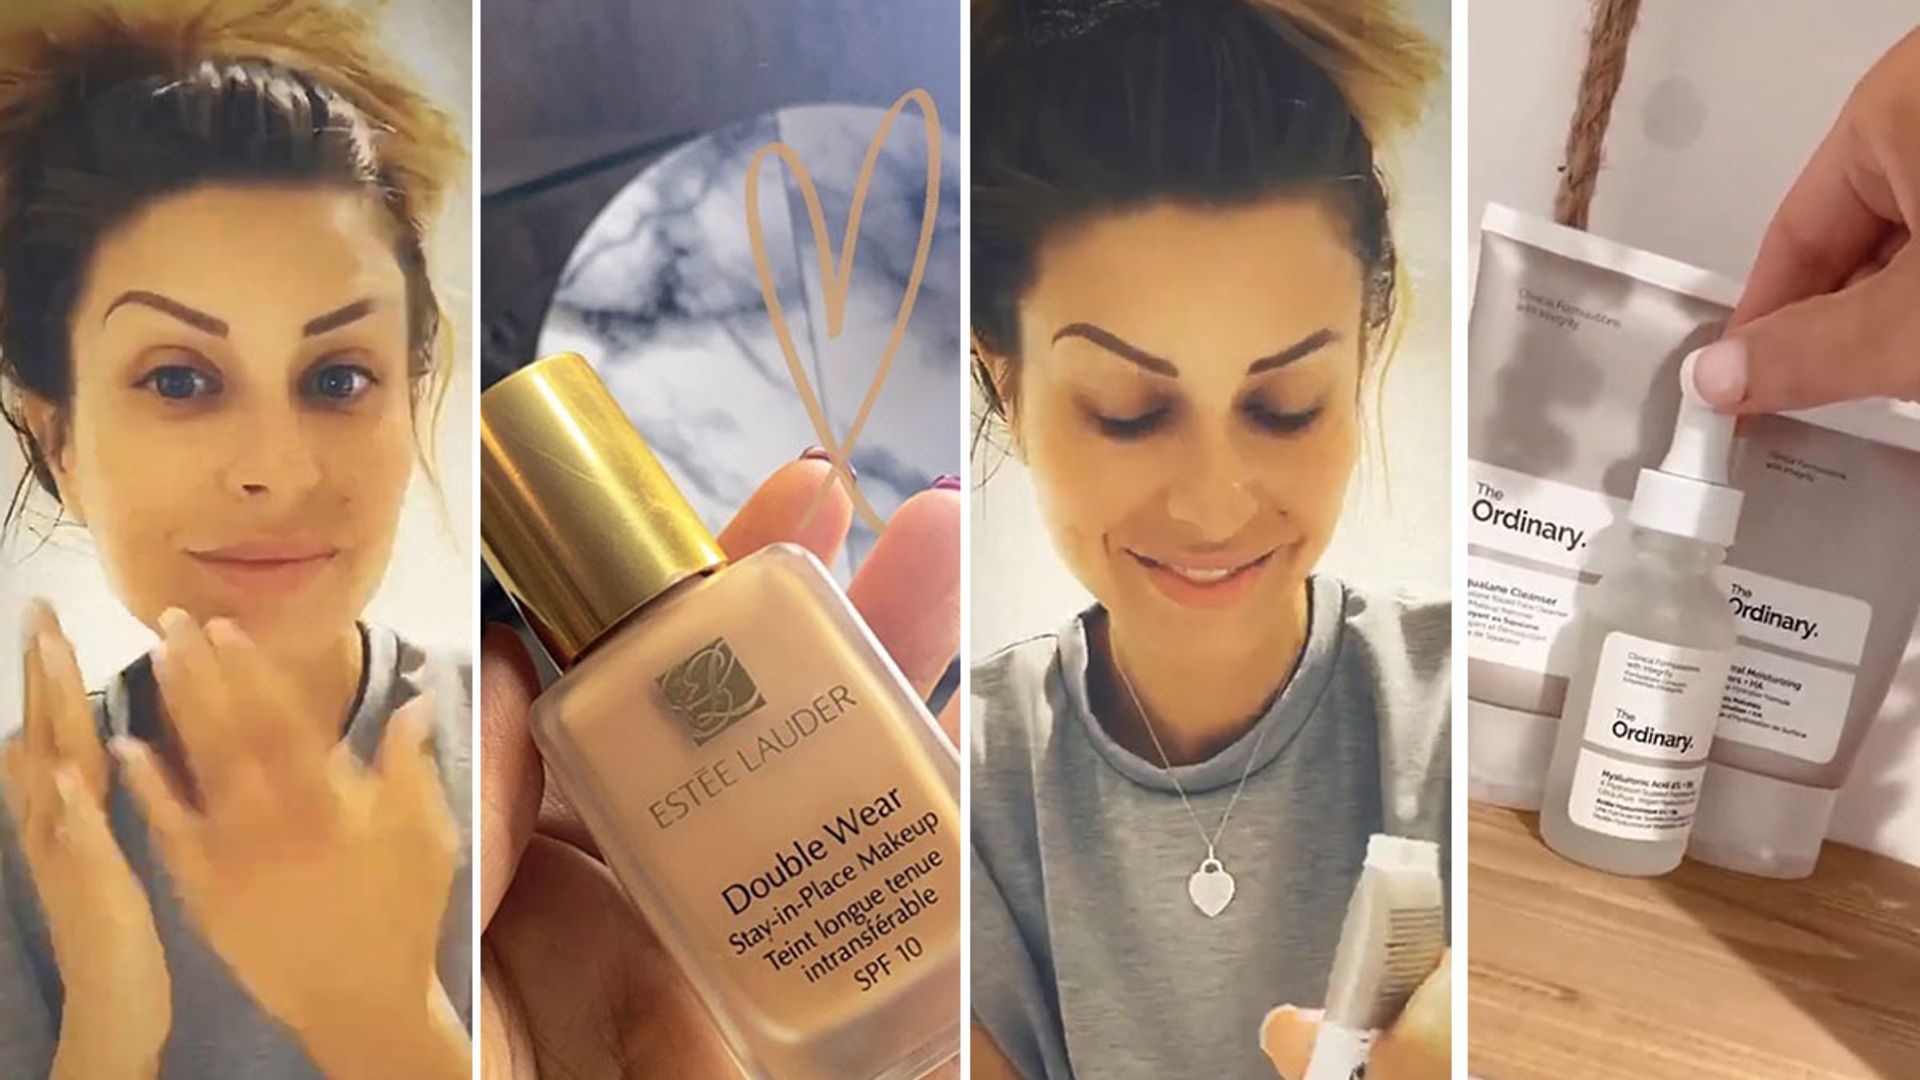 Mrs Hinch's makeup buys: From her skincare routine, to her favourite foundation & go-to tanning products